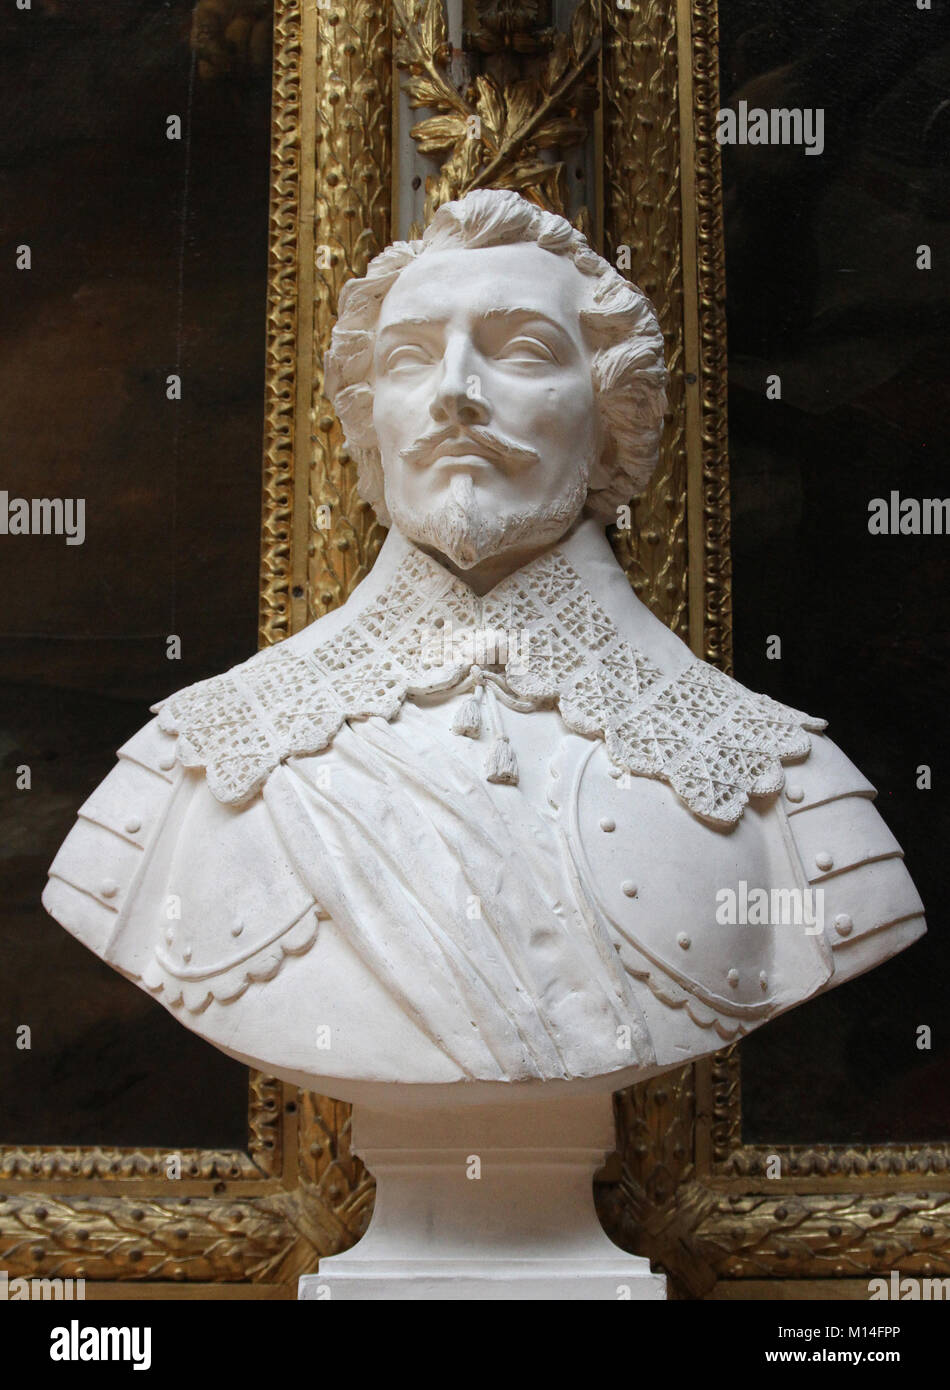 Marble bust of Charles Blanchefort, Marquis of Crequy, Marshal of France by Jean-Pierre Dantan in the Gallery of Battles, Versailles Palace, Ile-De-Fr Stock Photo